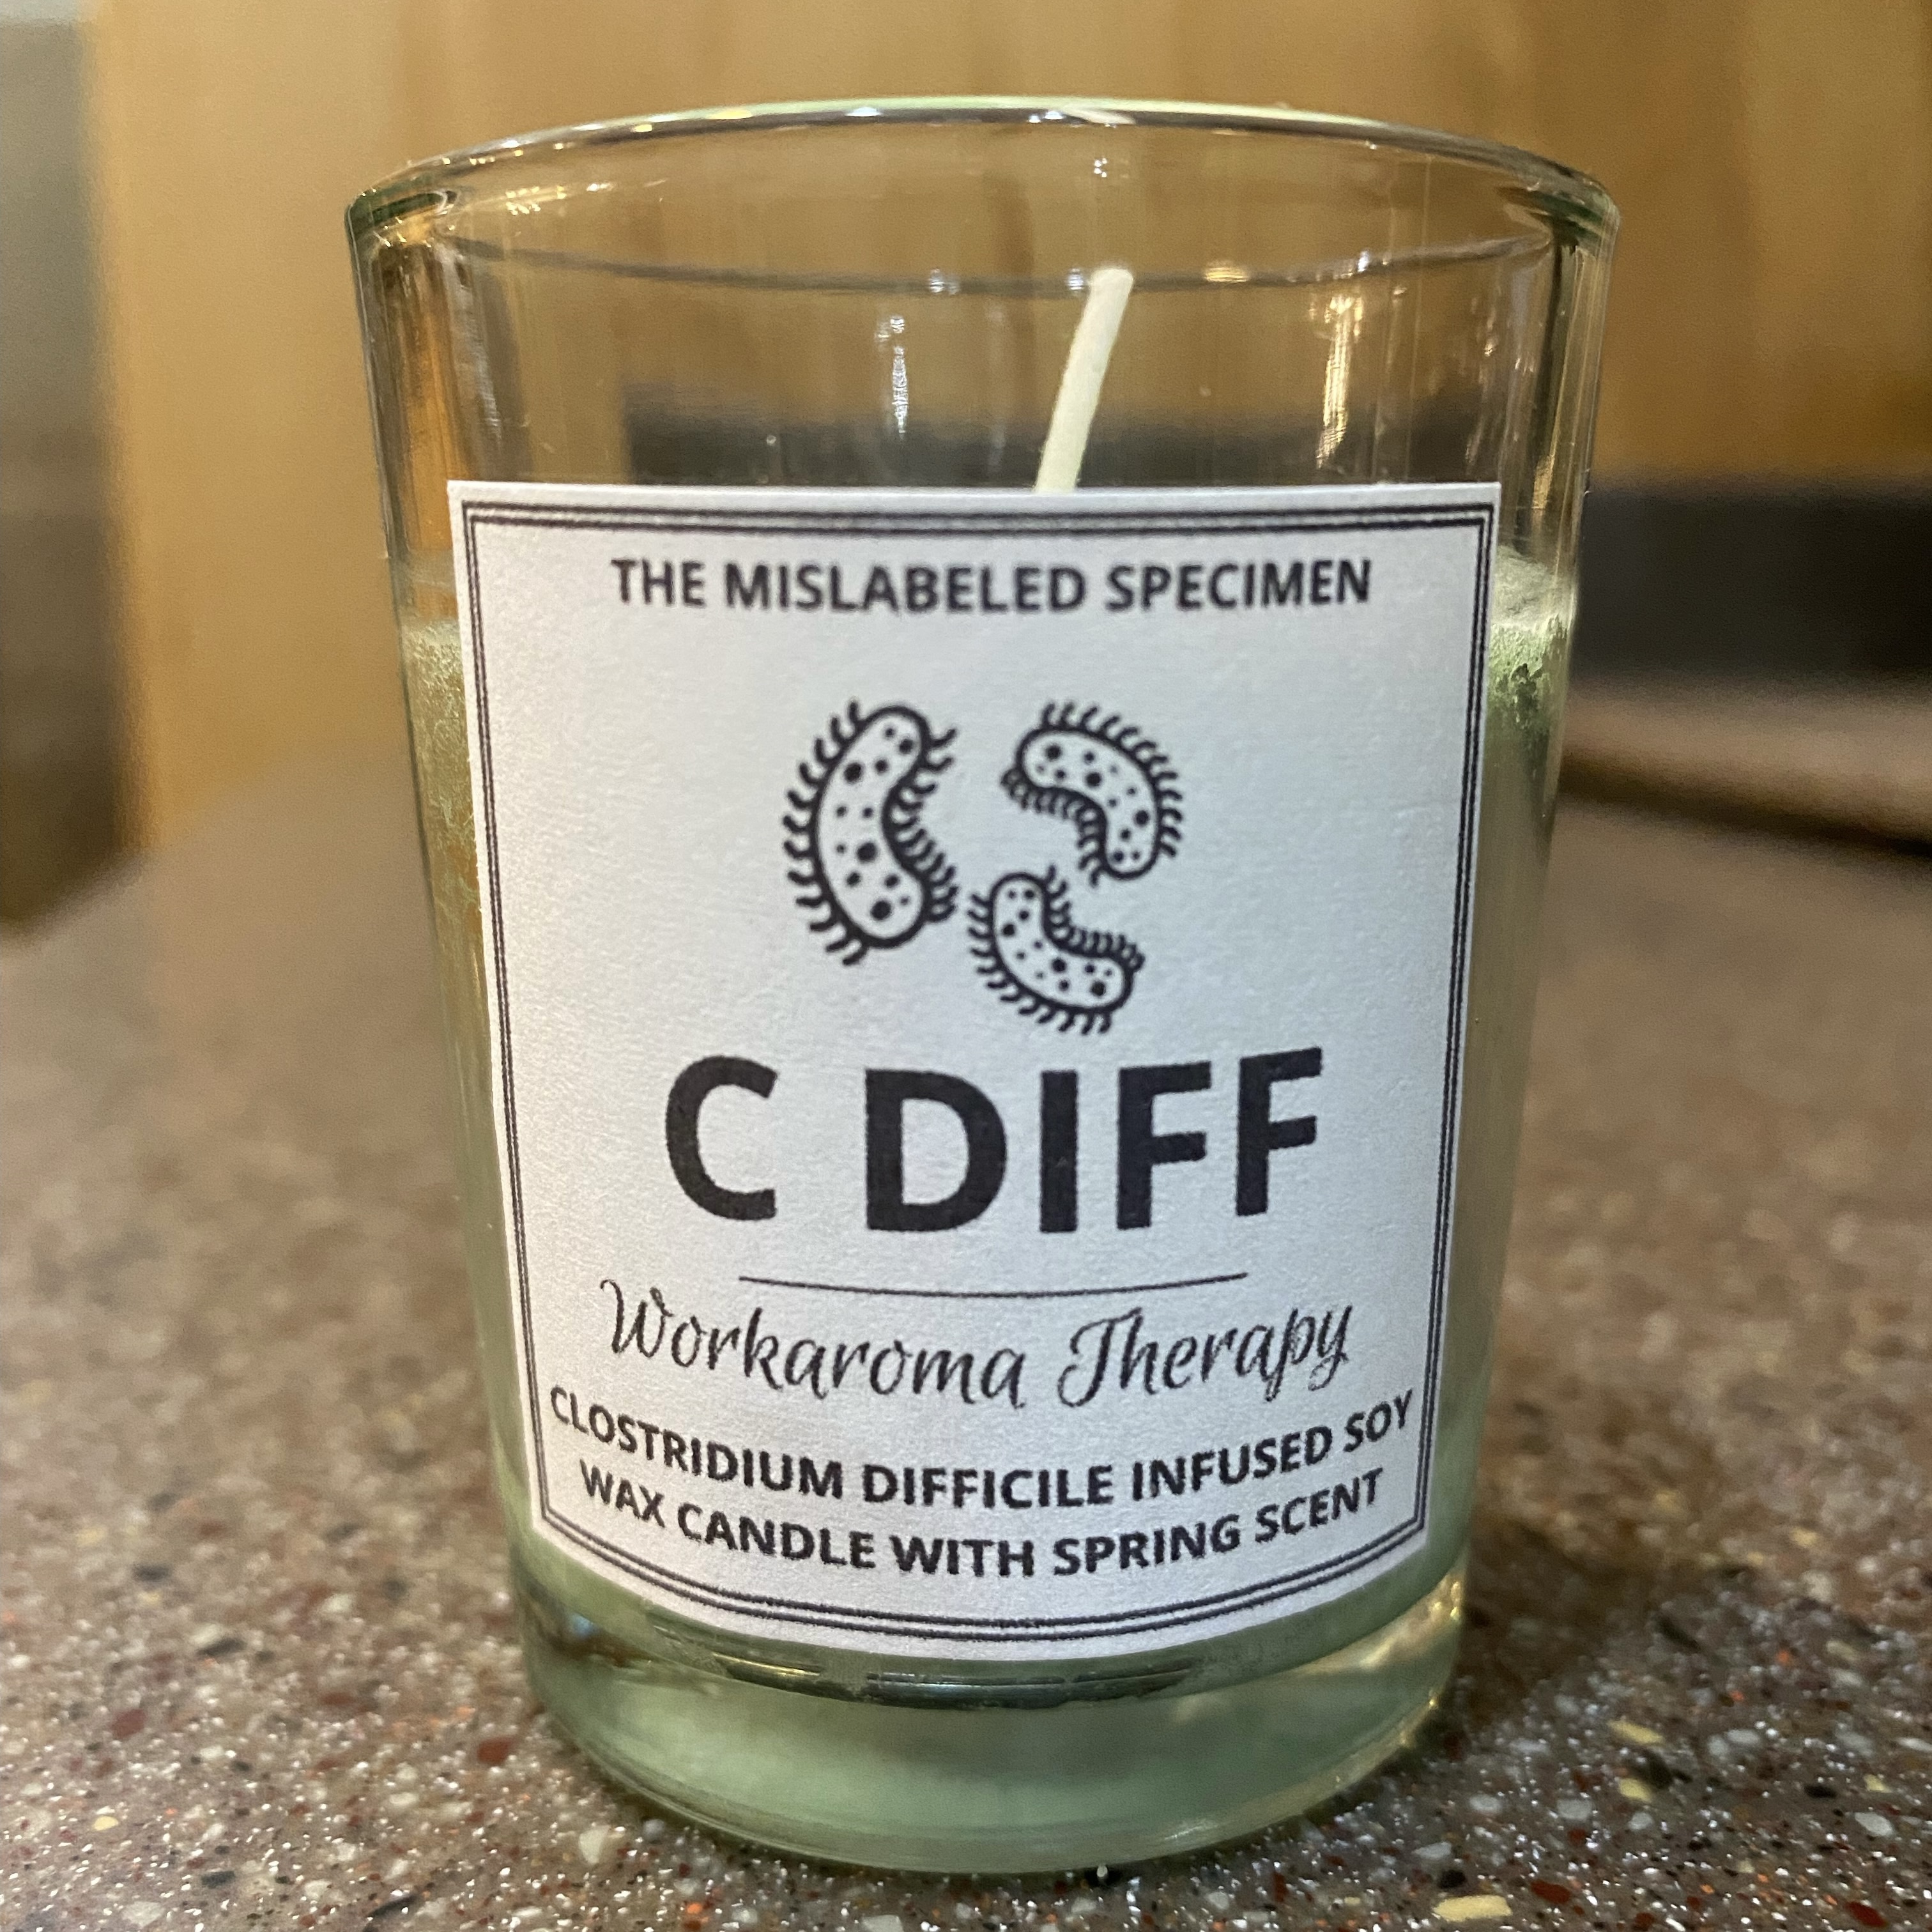 C Diff Workaroma Therapy Funny Gag Candles Soy Wax Candle with Spring Scent